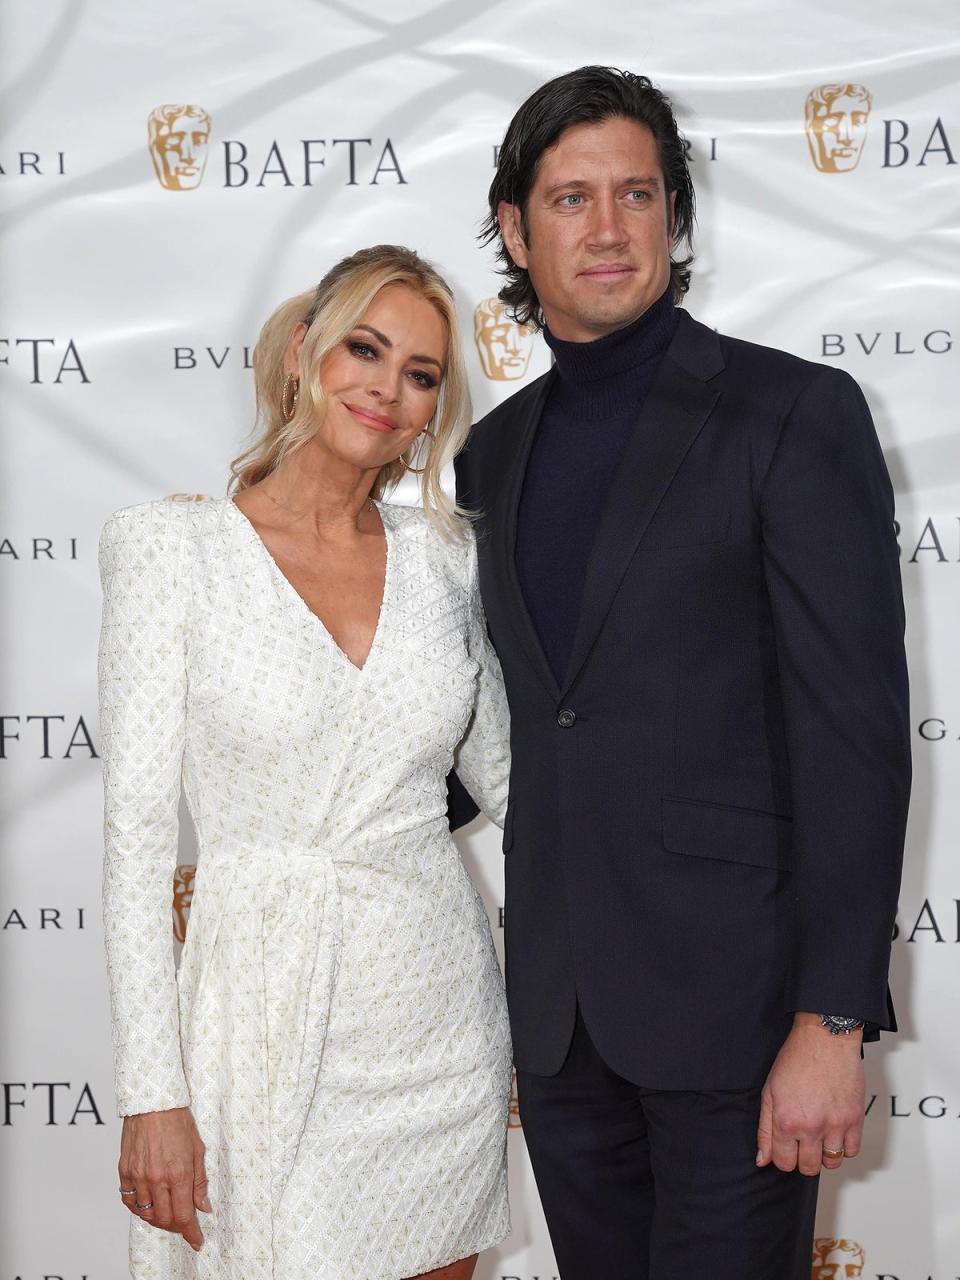 Daly shares two daughters with husband Vernon Kay (Kirsty O’Conner/PA)